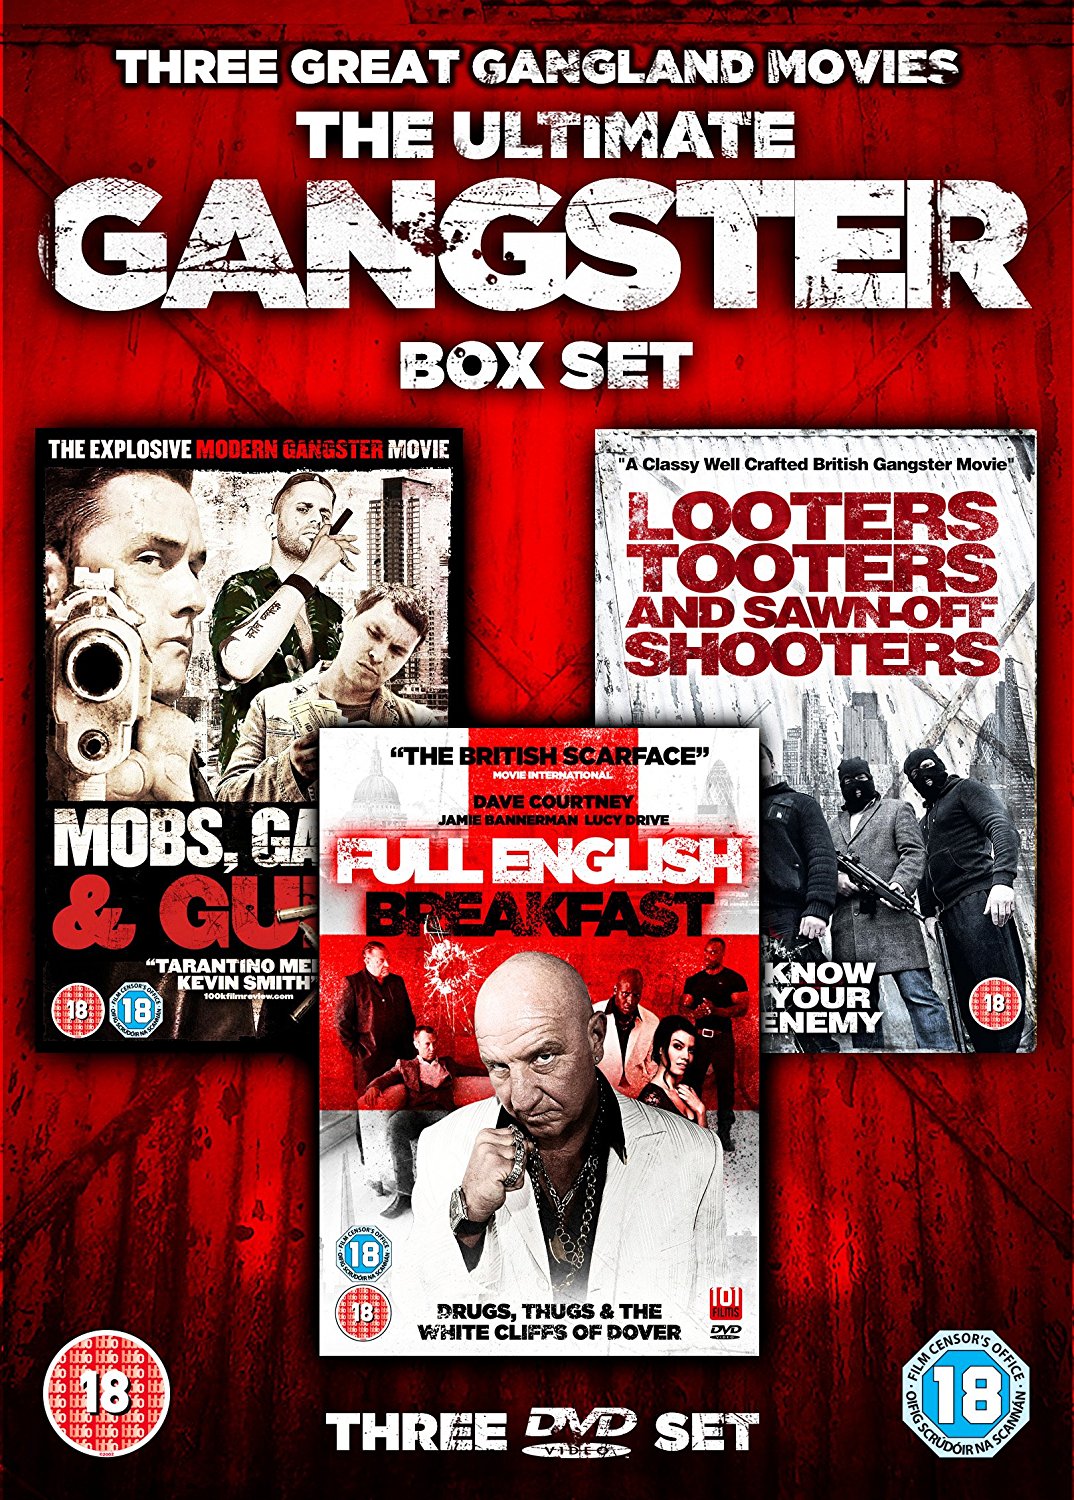 The Ultimate Gangster Box Set (DVD)